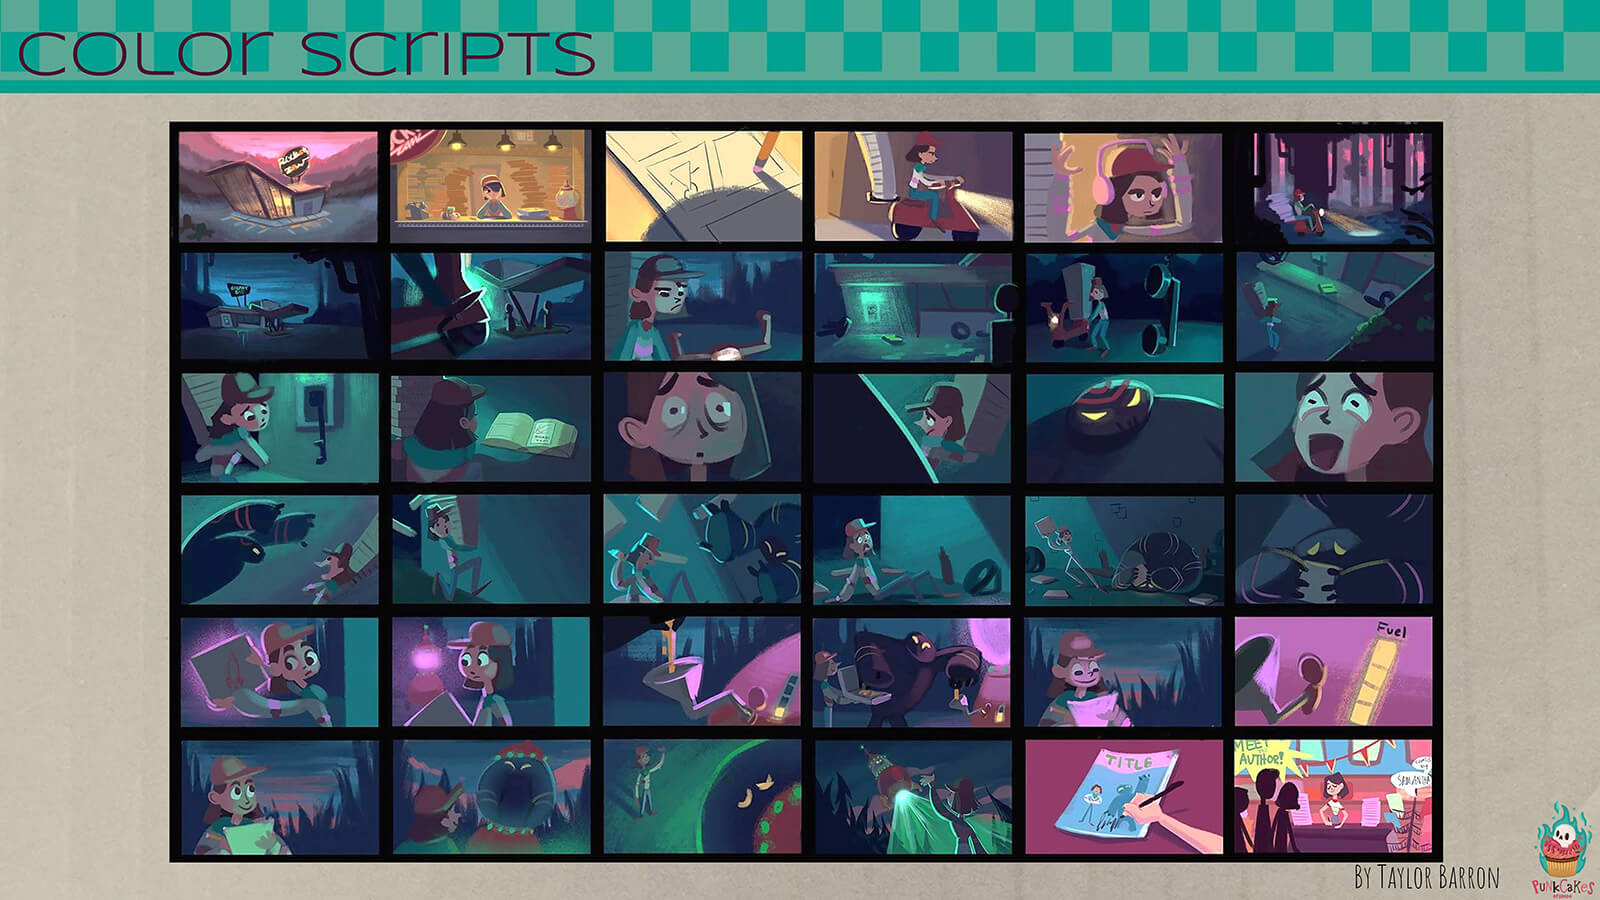 A "color script" for the film, showing the color palette over the course of the film's major scenes.